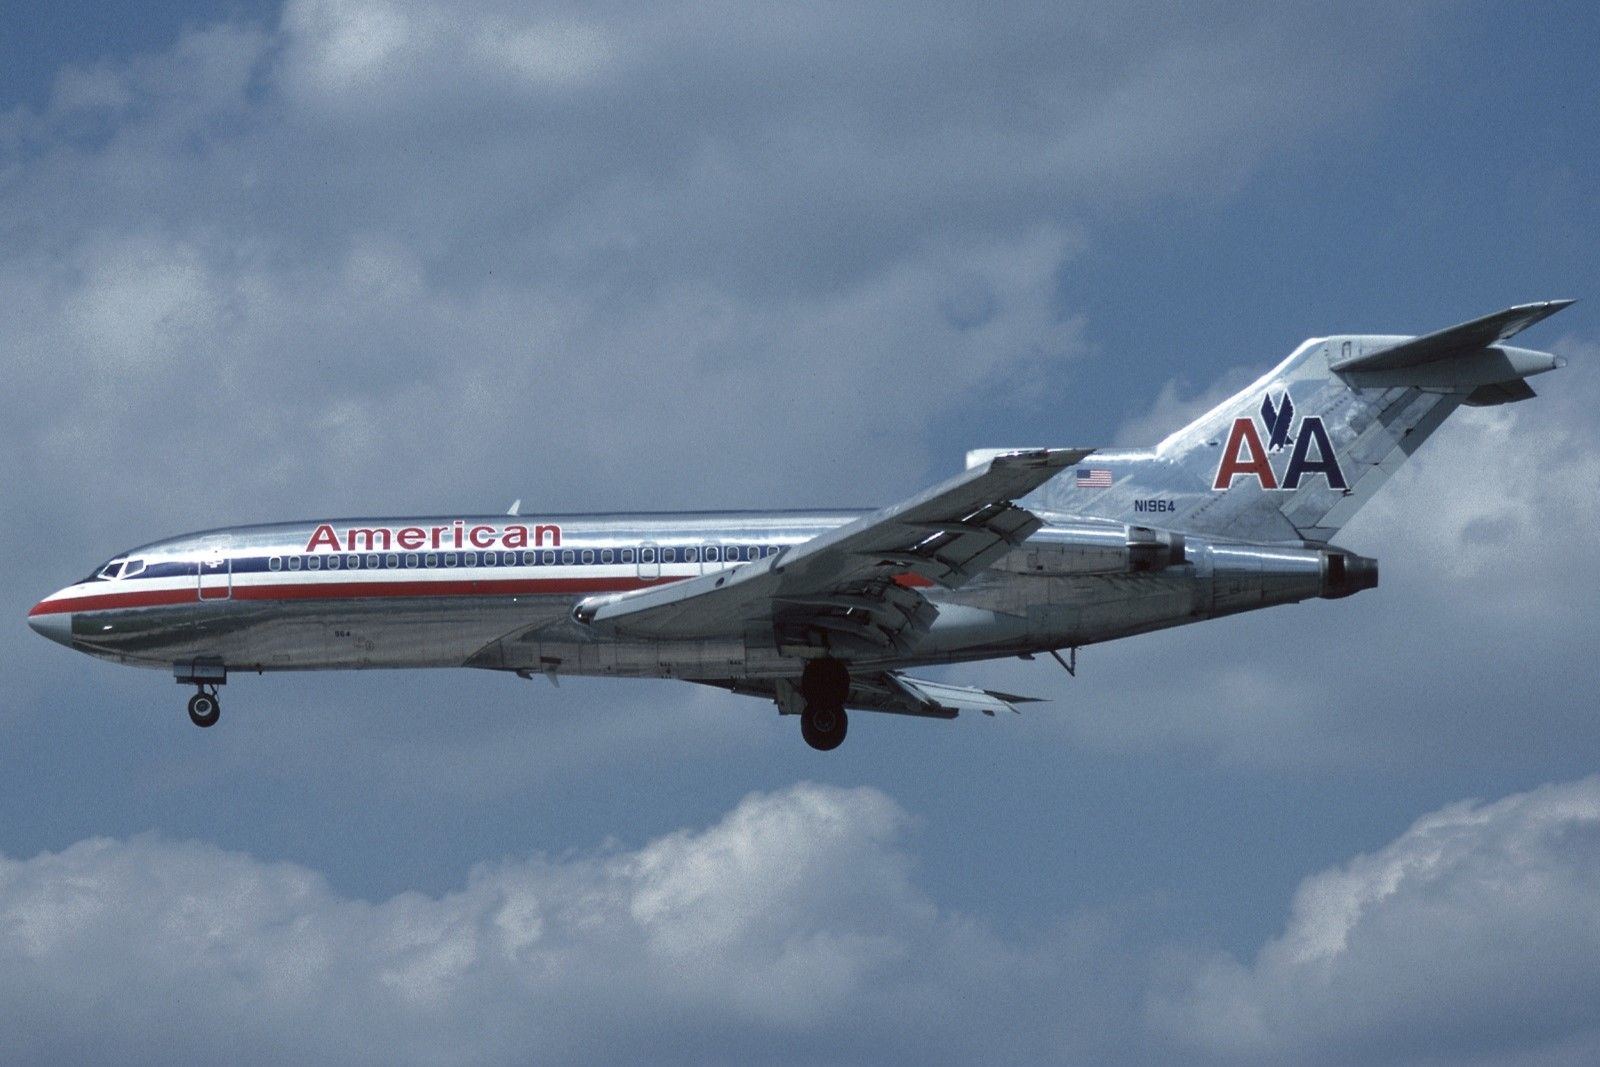 An American Airlines Boeing 727 Flying in the sky.